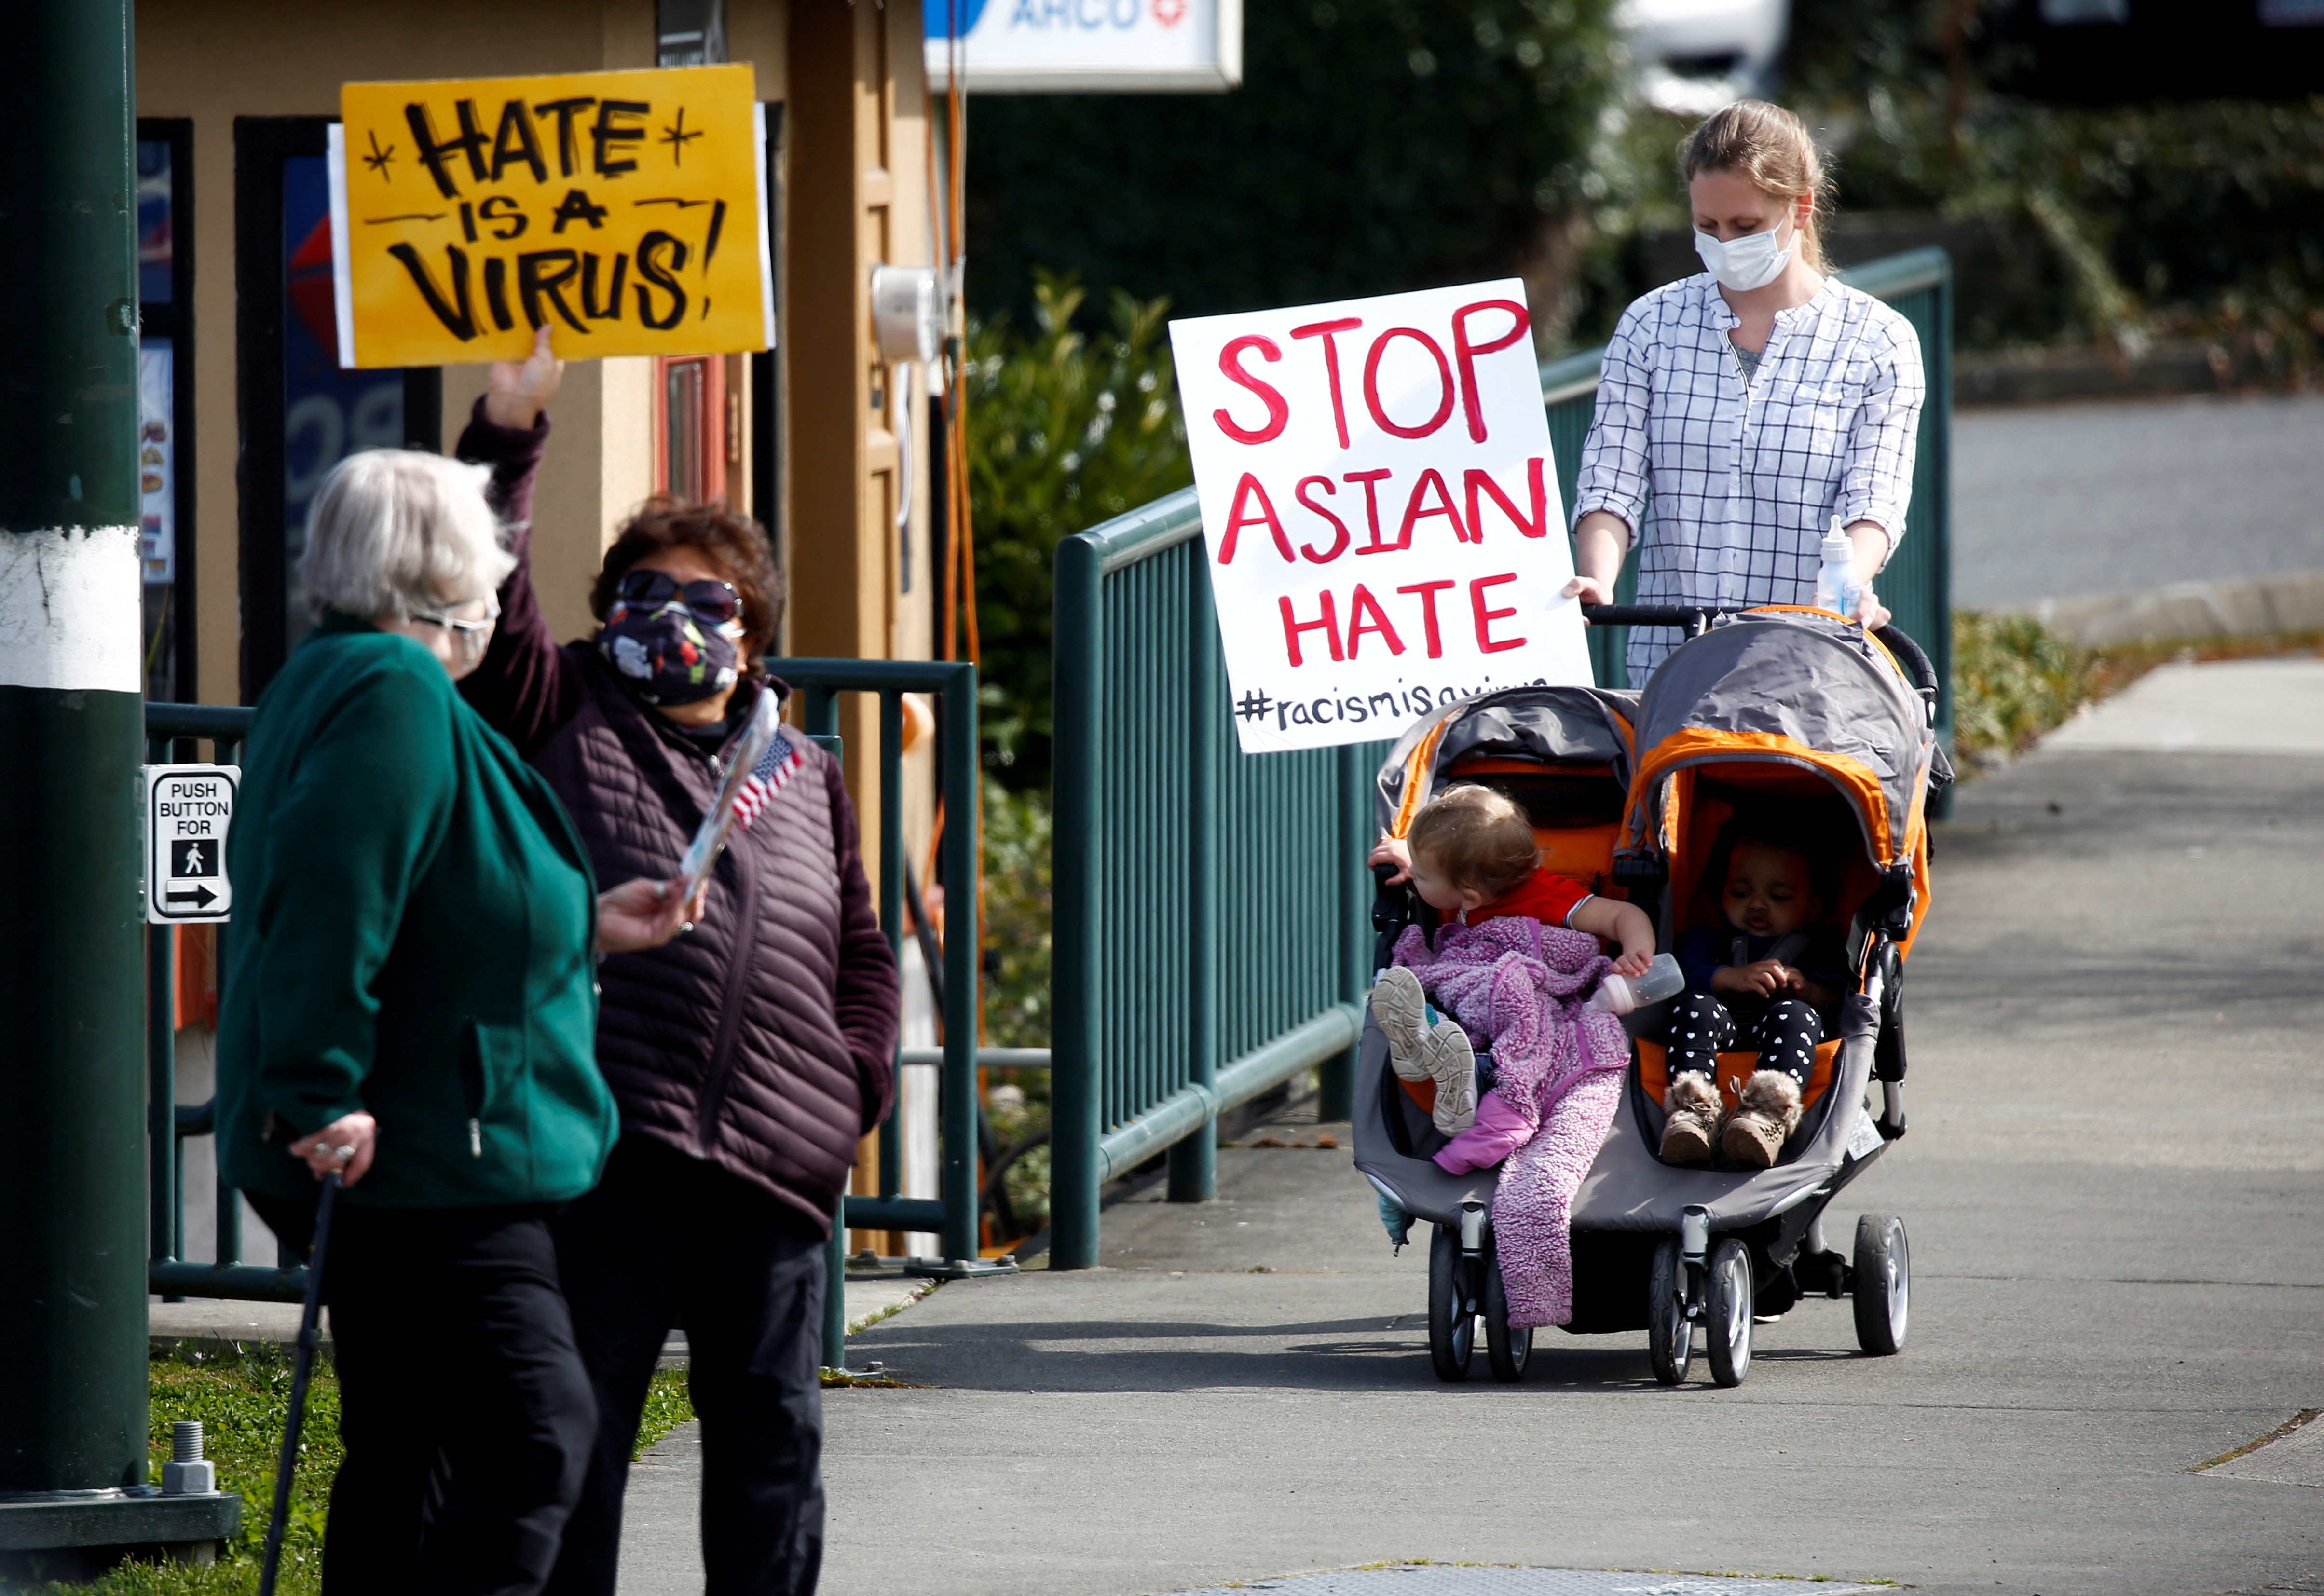 A pre-planned rally against anti-Asian hate crimes held by the Asian American Pacific Islanders Organizing Coalition Against Hate and Bias in Newcastle